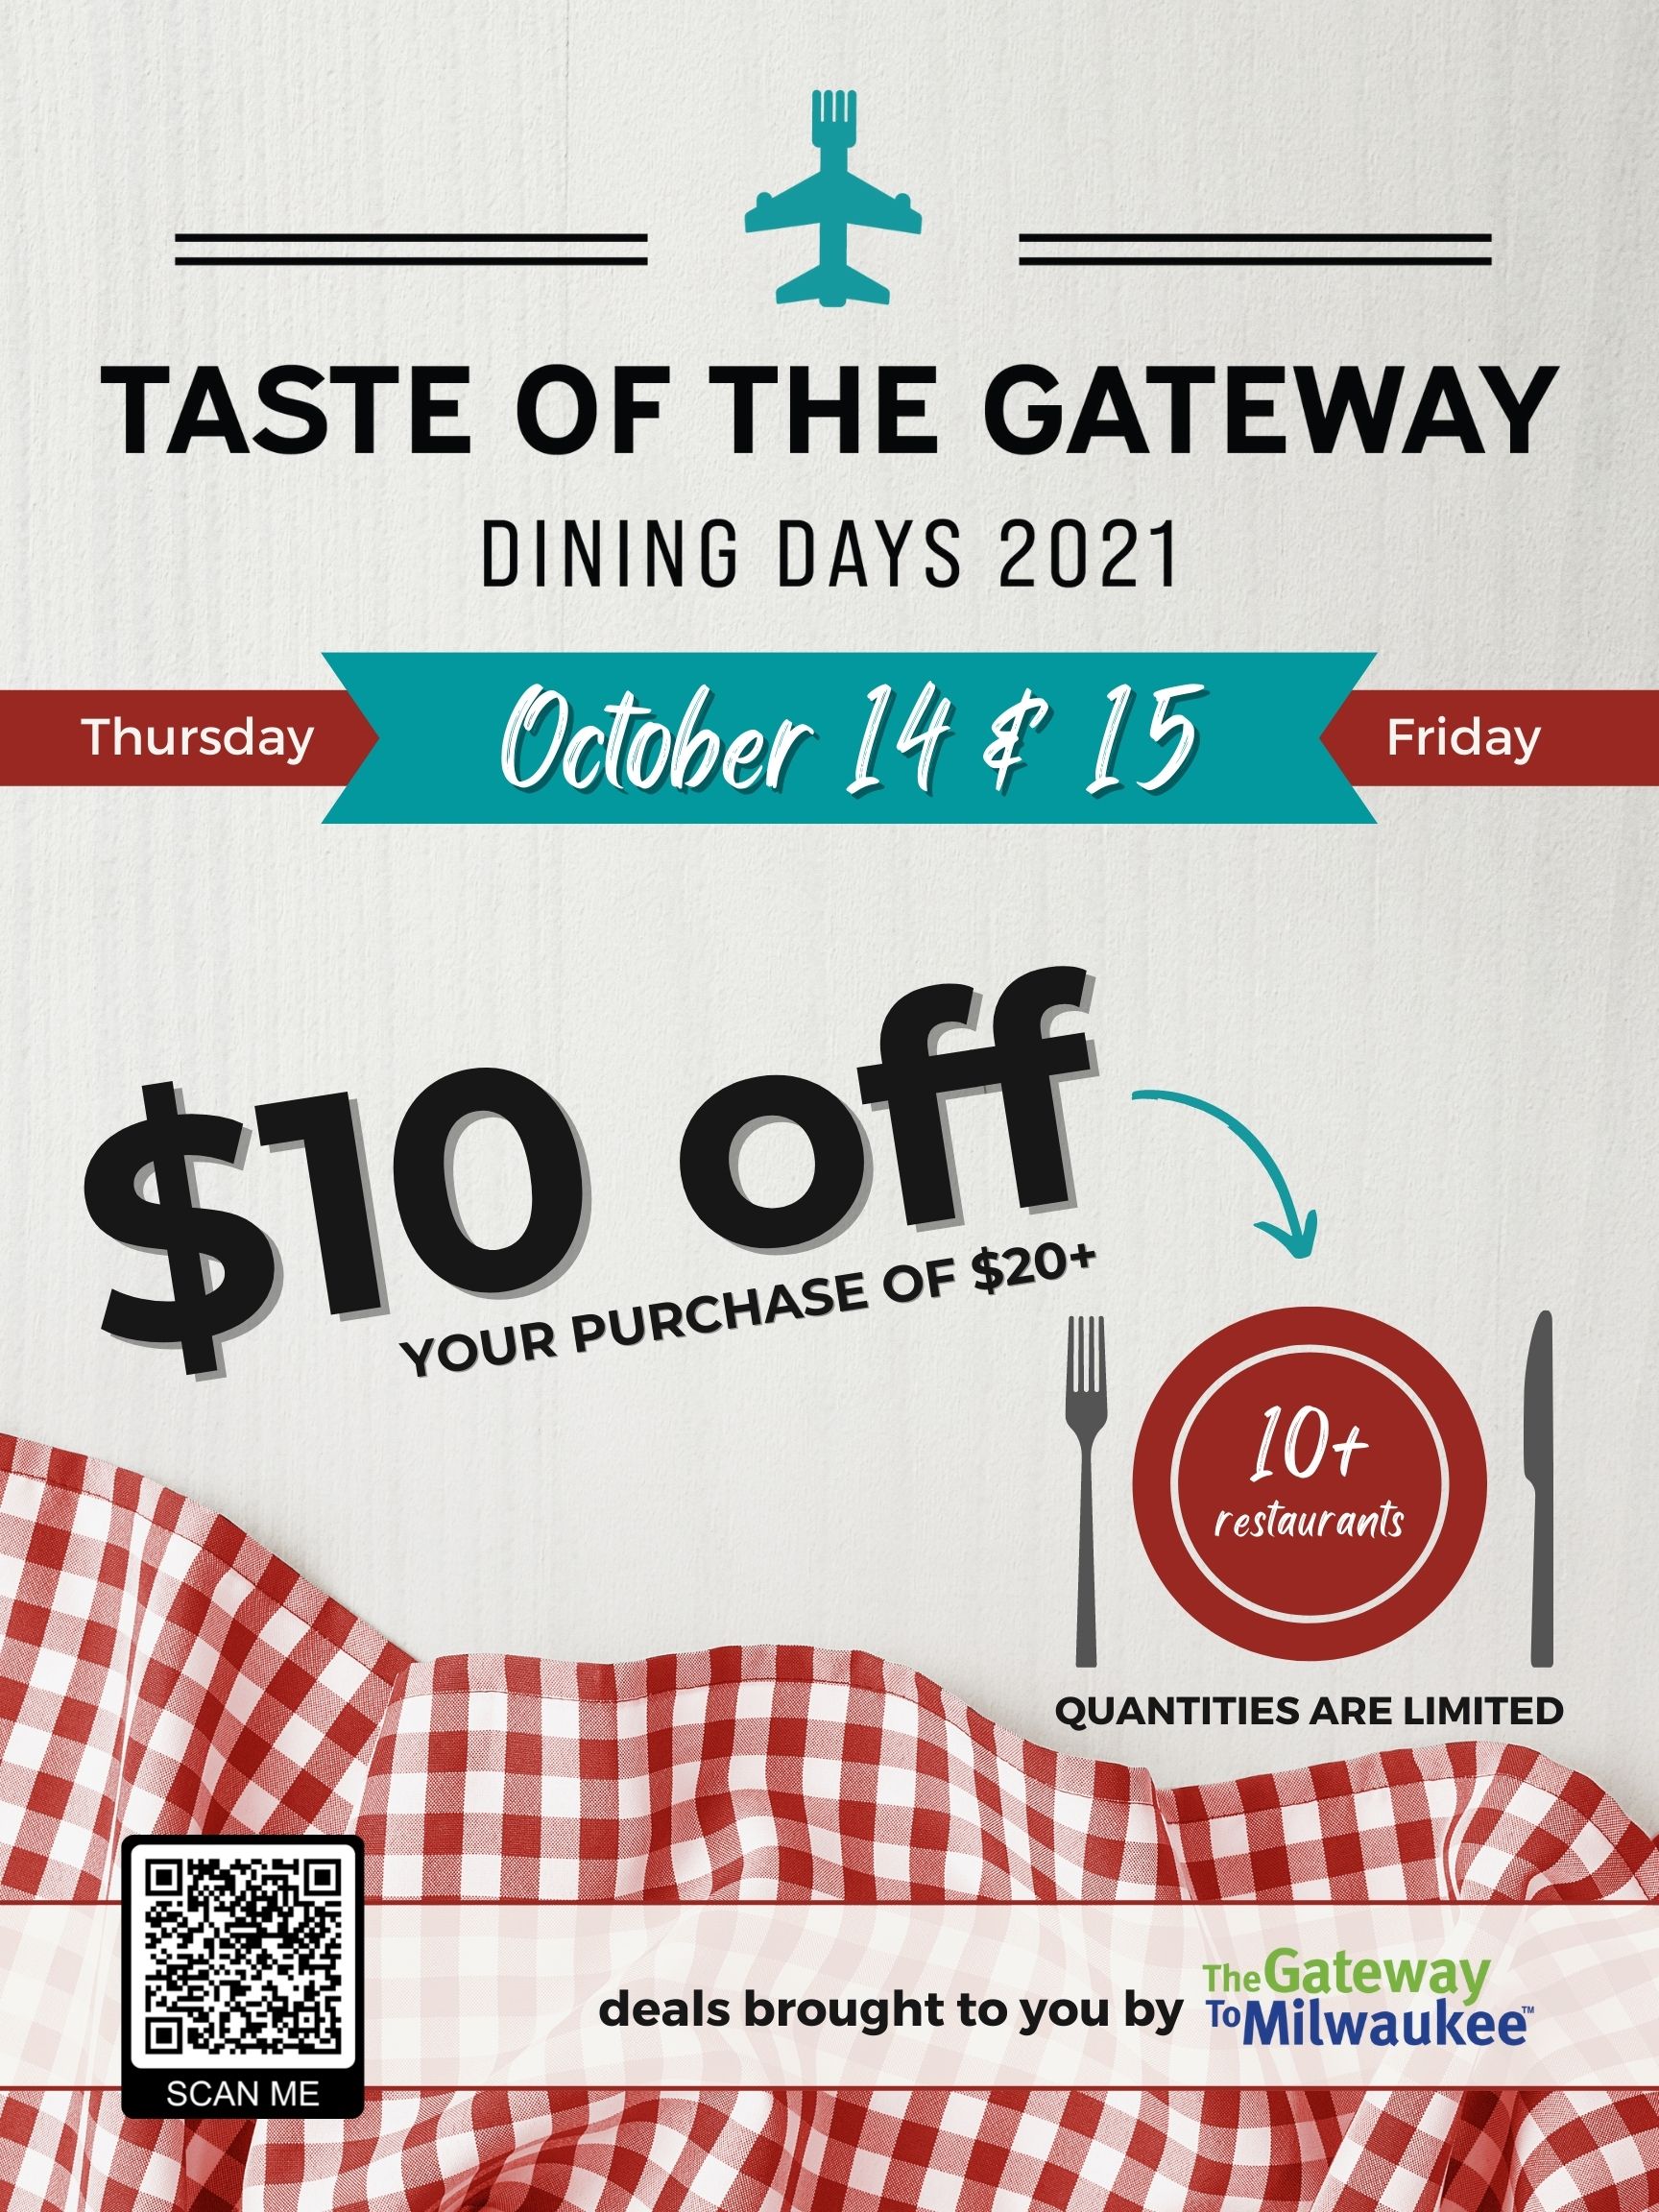 Taste of the Gateway – Dining Days:  Fantastic dining discounts available again this year.